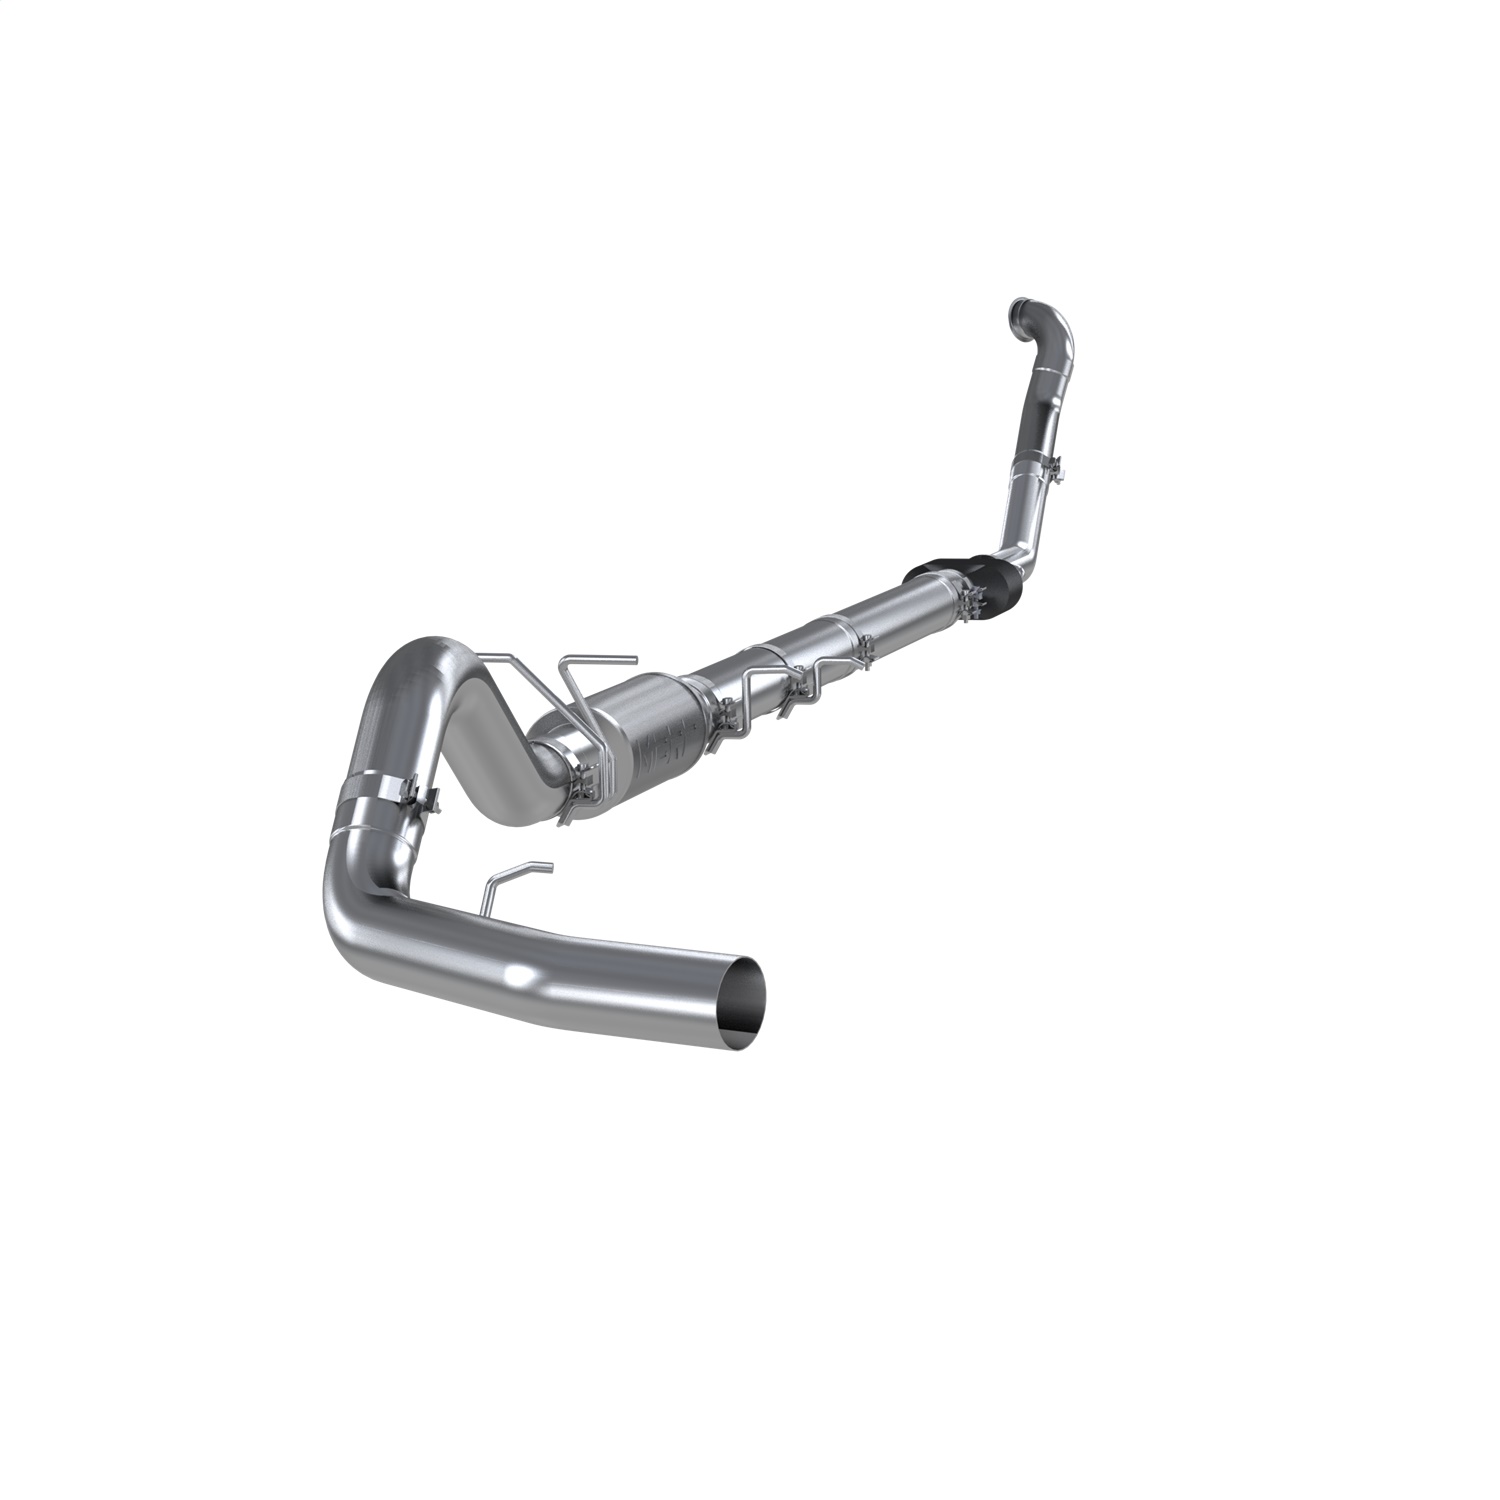 MBRP Exhaust MBRP Exhaust S6218P Performance Series; Turbo Back Fits 94-97 F-250 F-350